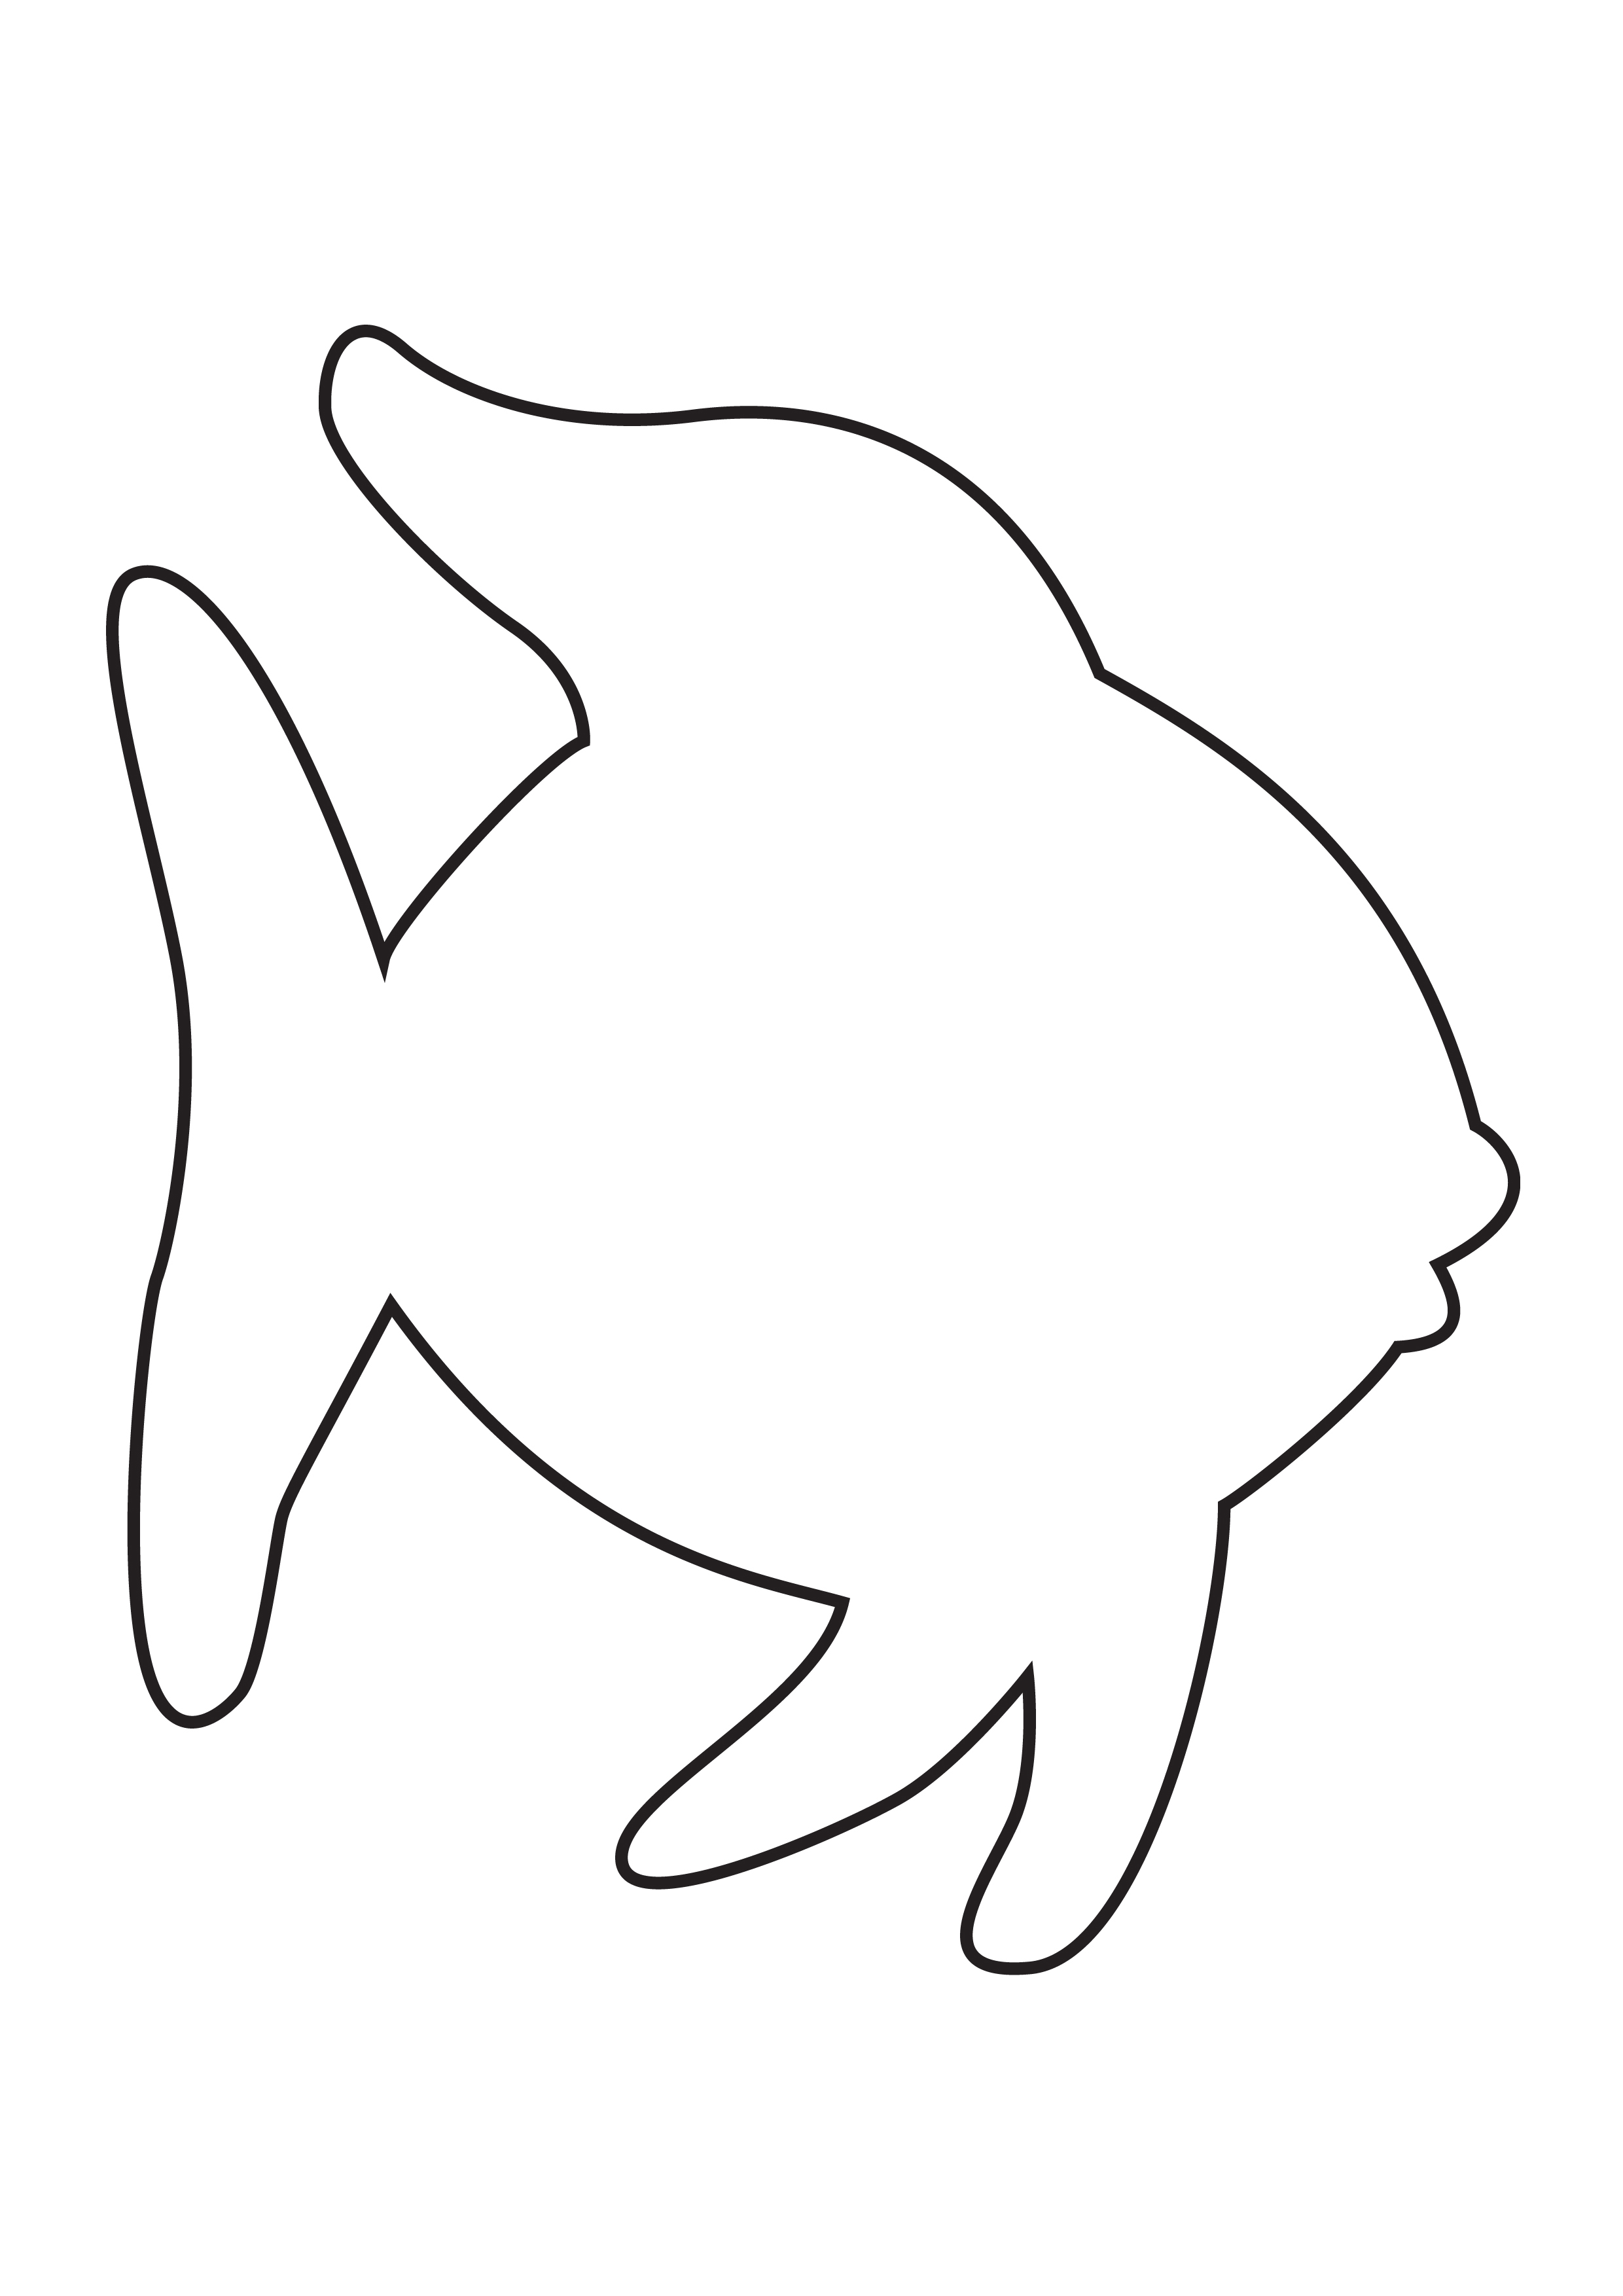 Free fish template.